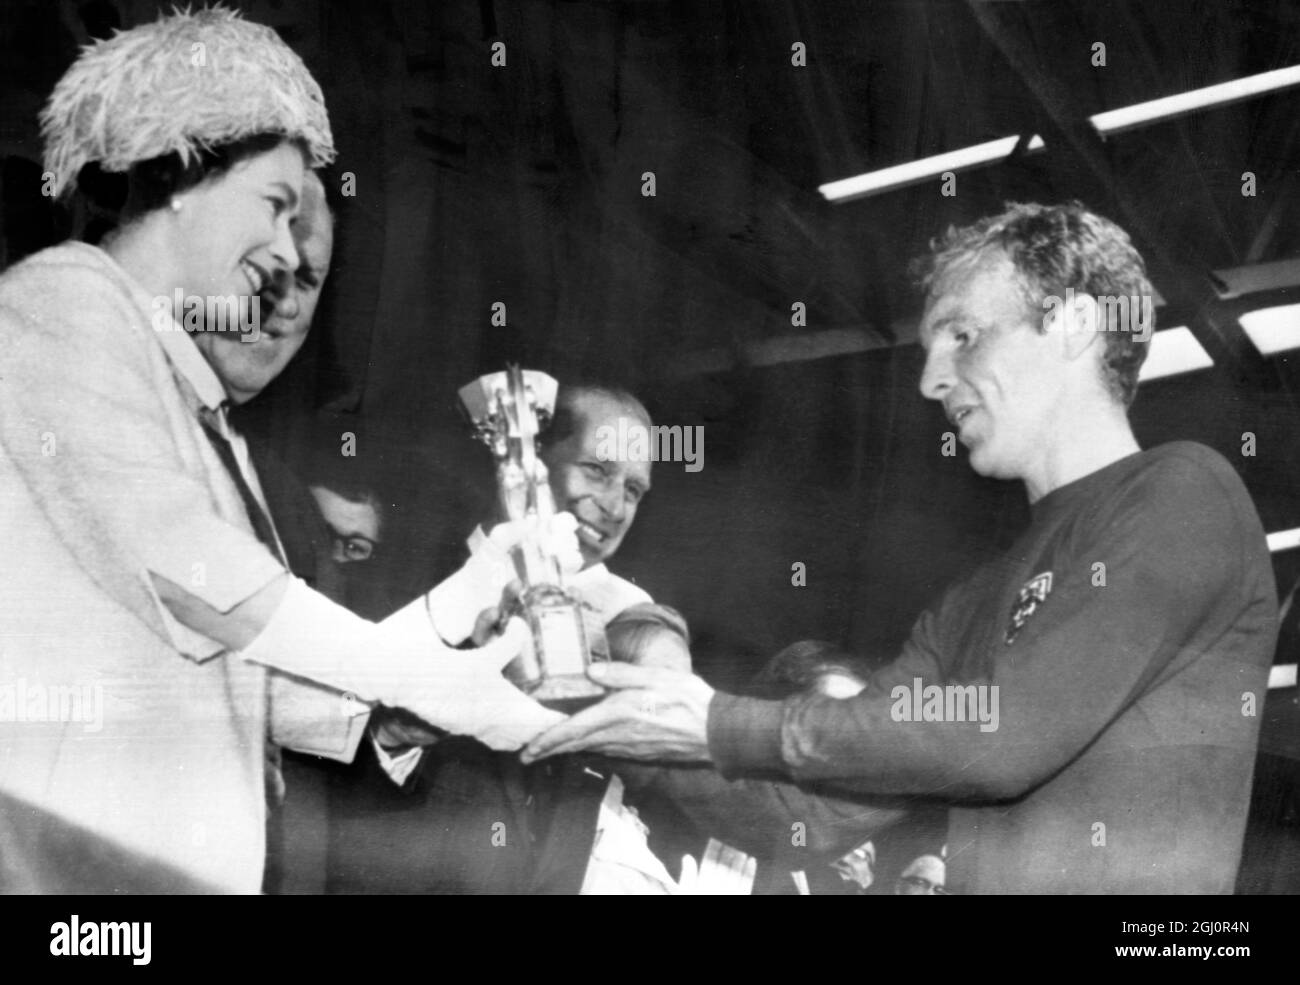 Queen presents cup to England's Captain. Britiain's Queen Elizabeth II is pictured presenting the Jules Rimet World Cup Trophy to England's Captain Bobby Moore, after England defeated West Germany in the final of the World Cup Tournament at Wembley Stadium today. England won 4-2. 30 July 1966 Stock Photo